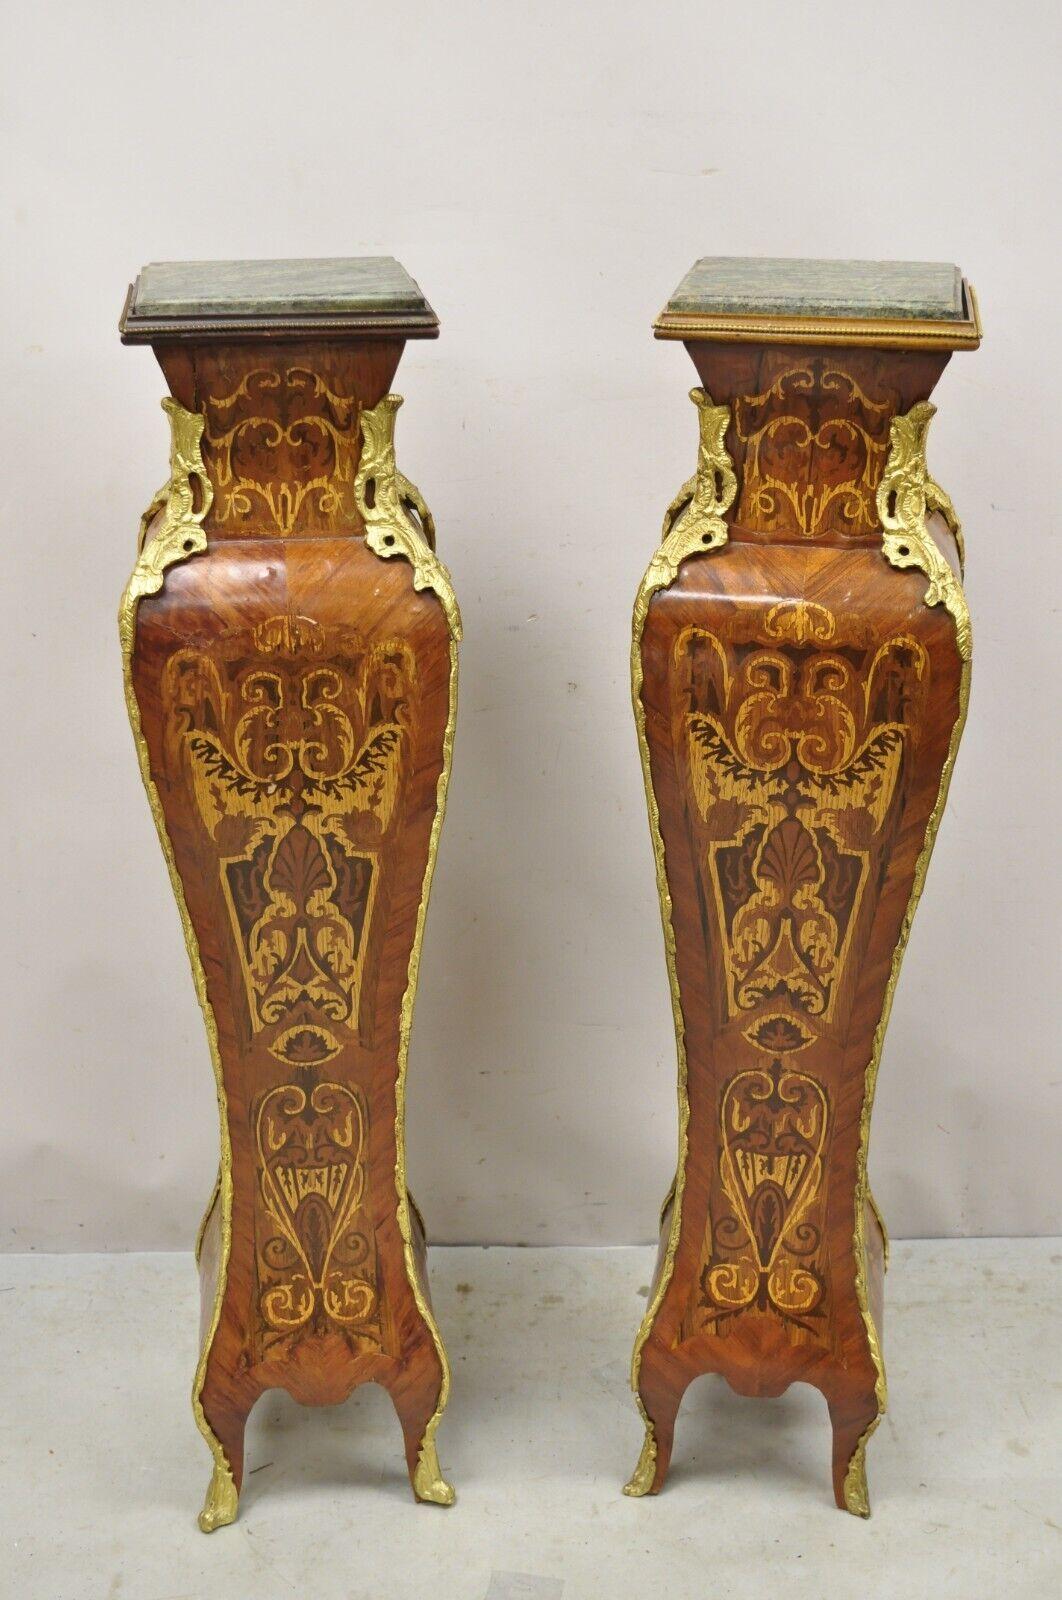 Vintage French Louis XV Style Marble Top Marquetry Inlay Bombe Pedestals - a Pair. Item features Green marble tops, marquetry inlay, brass ormolu, shapely bombe form, very nice vintage pair, great style and form. Circa Late 20th